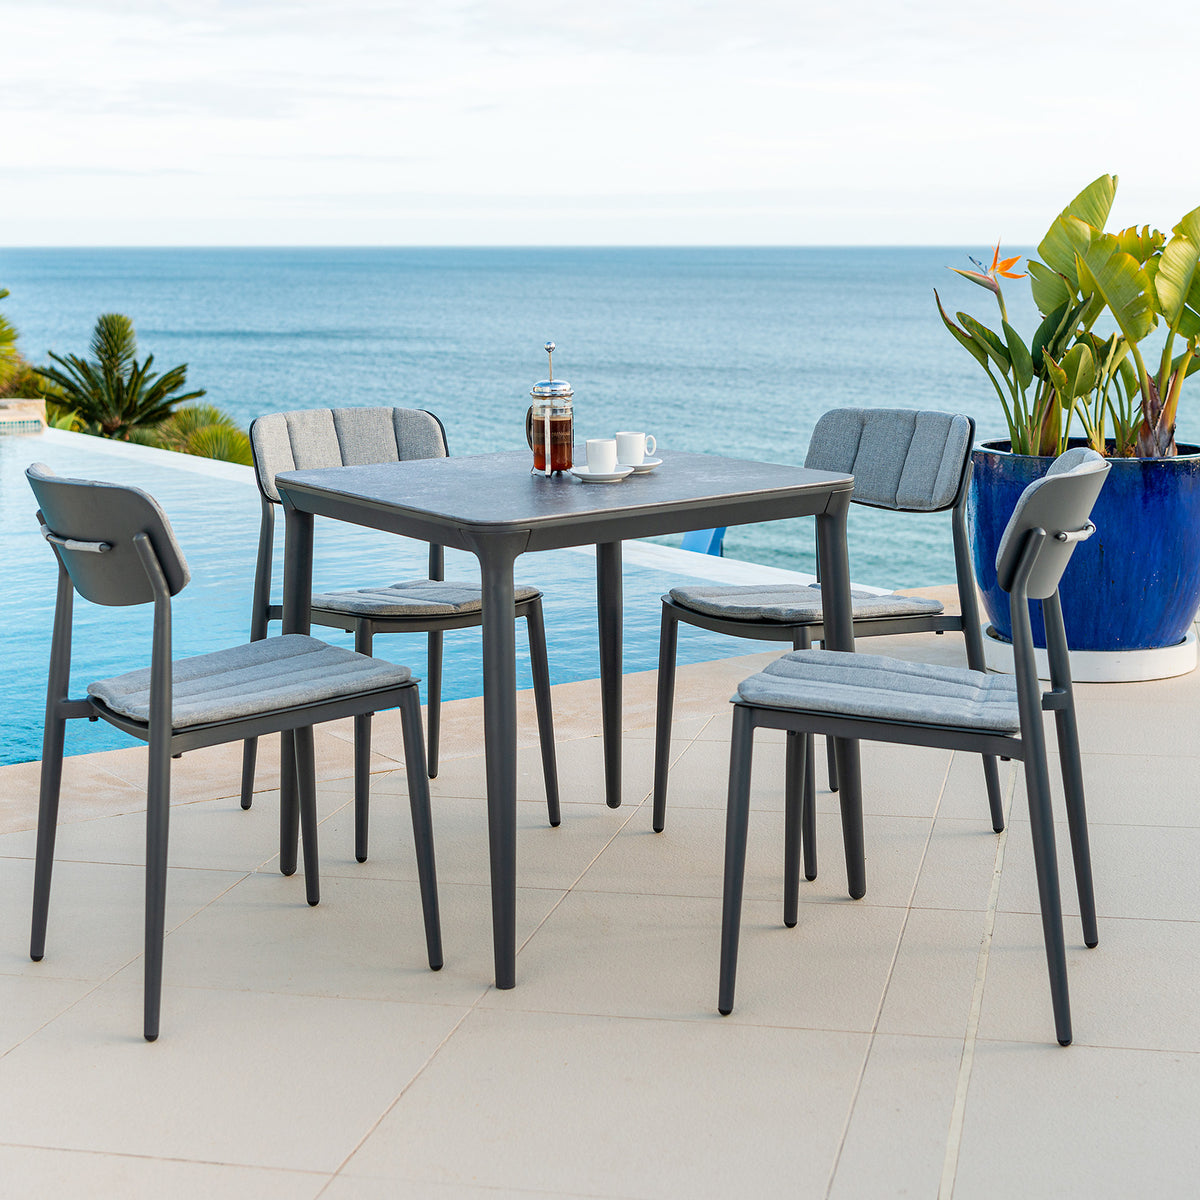 Alexander Rose Outdoor Rimini Stacking Side Chair